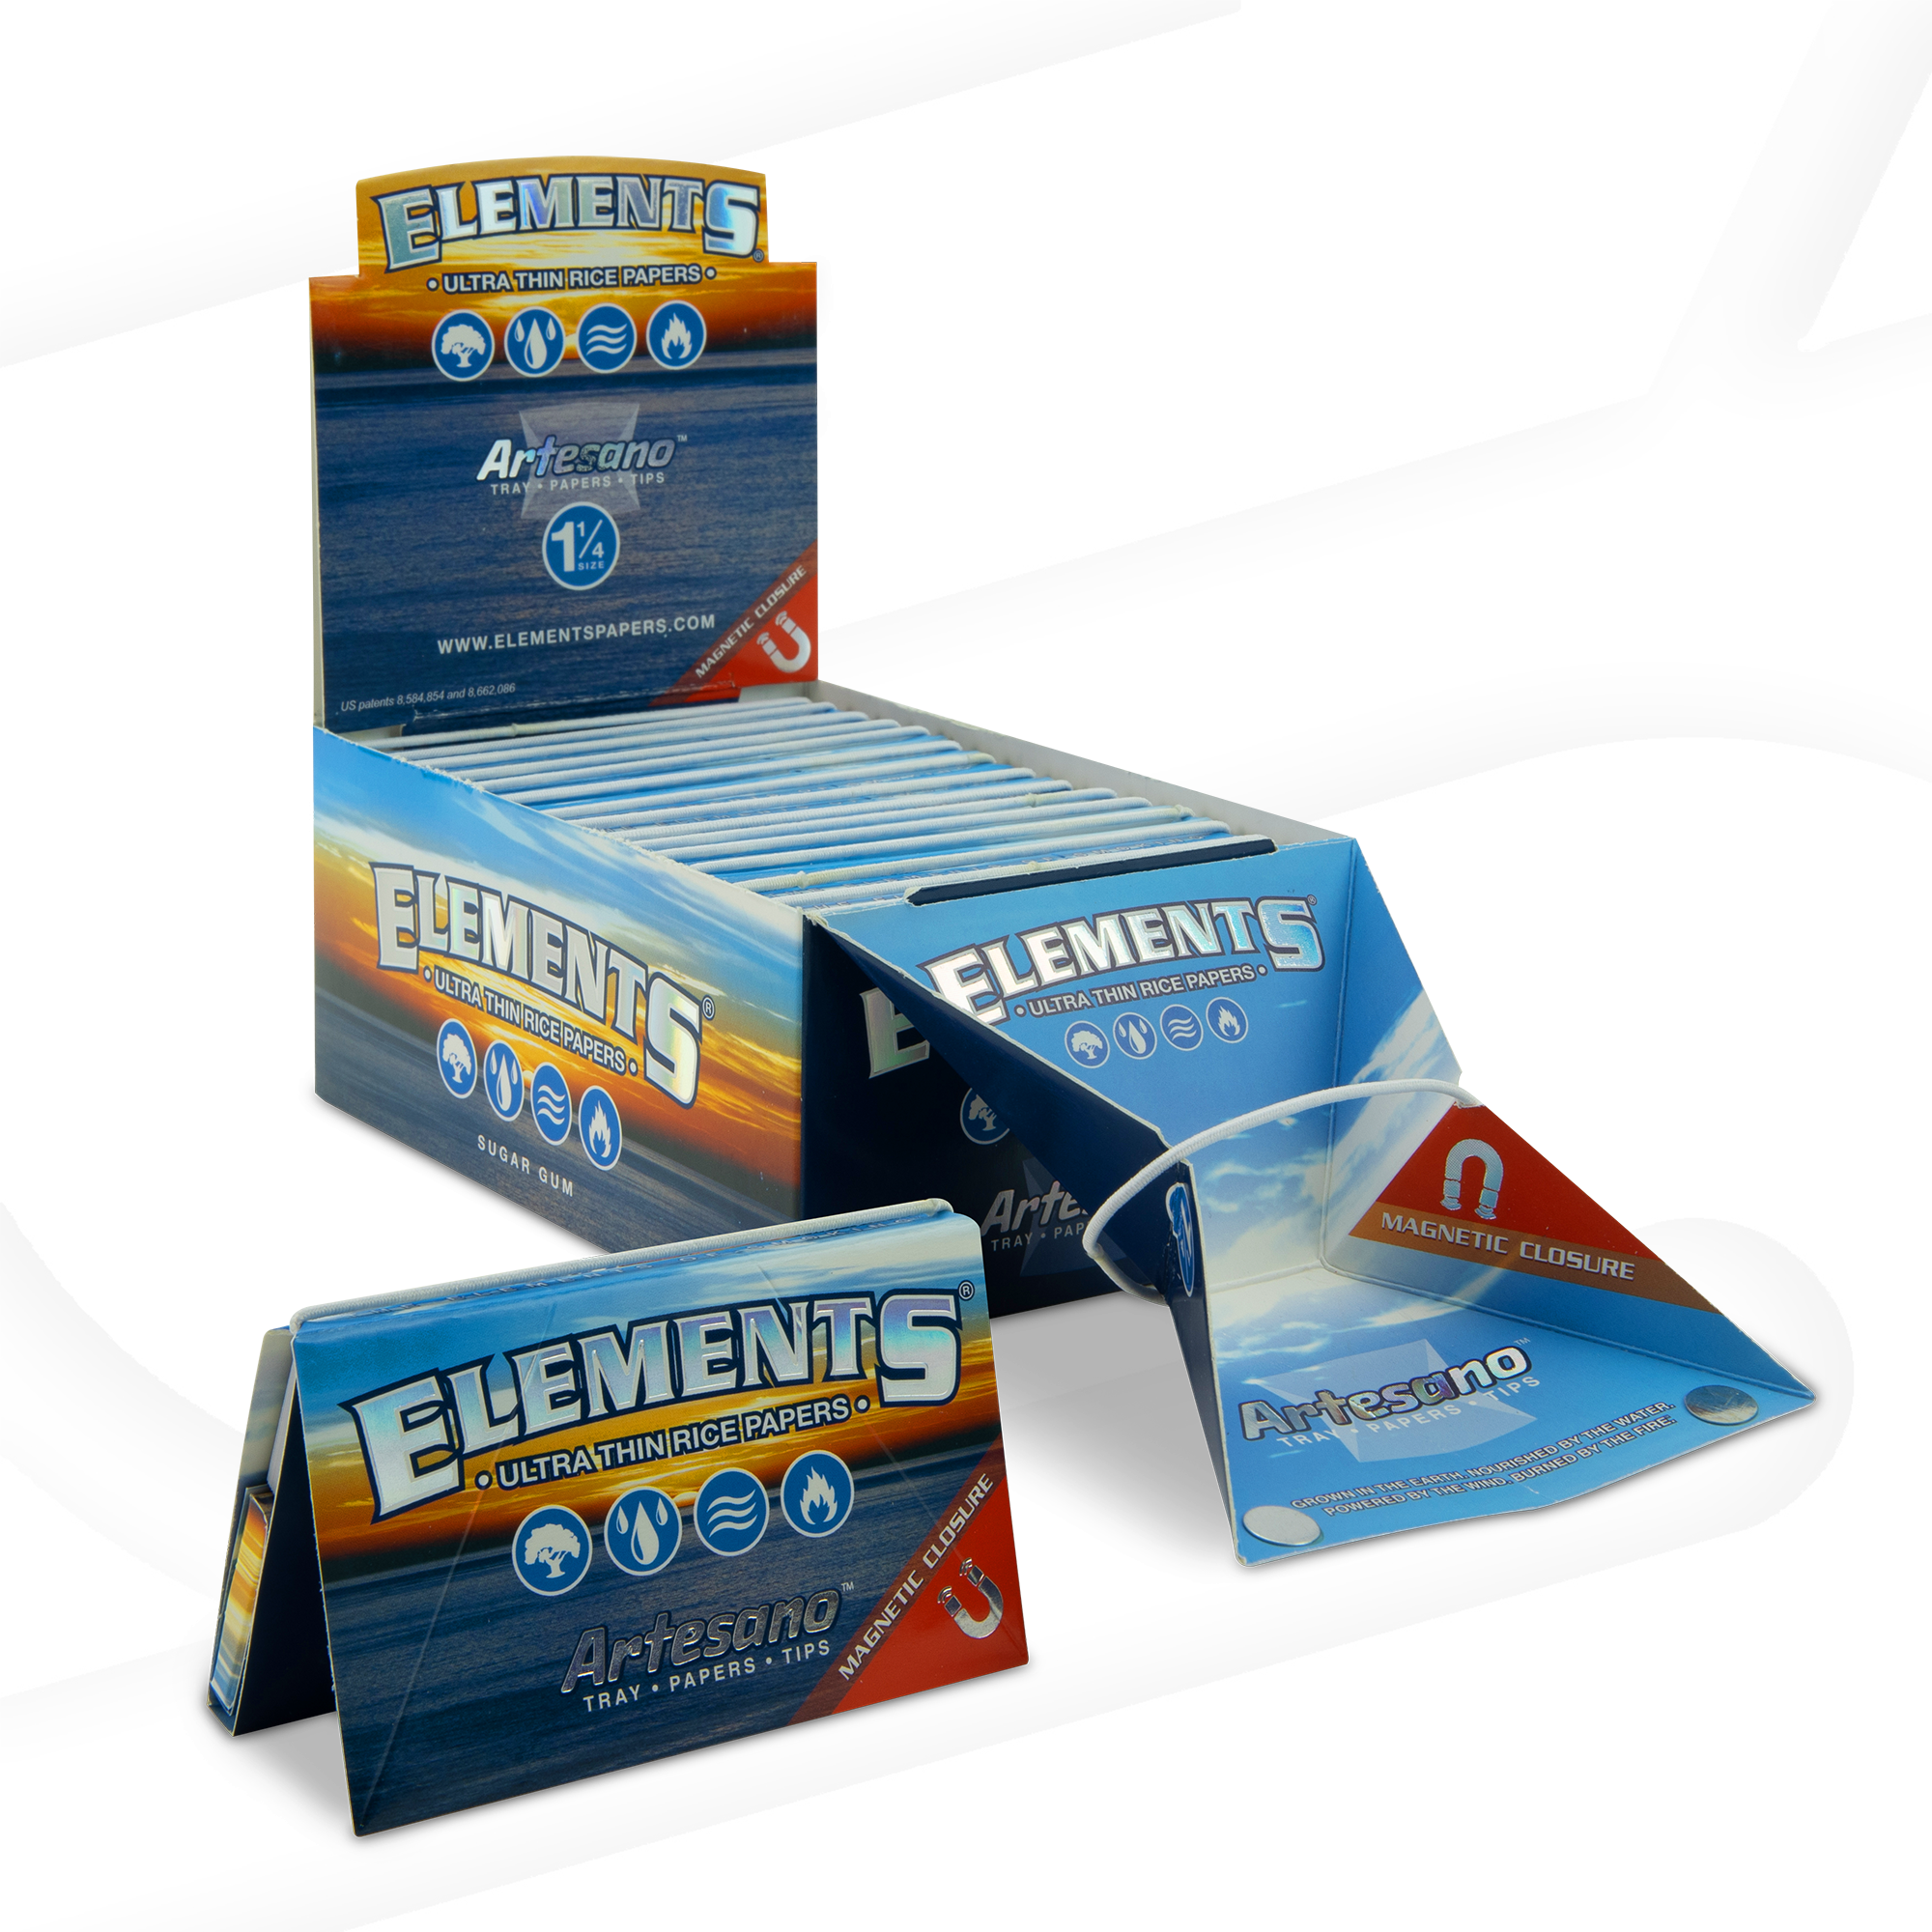 Elements - 1 1/4 Rolling Papers 300s